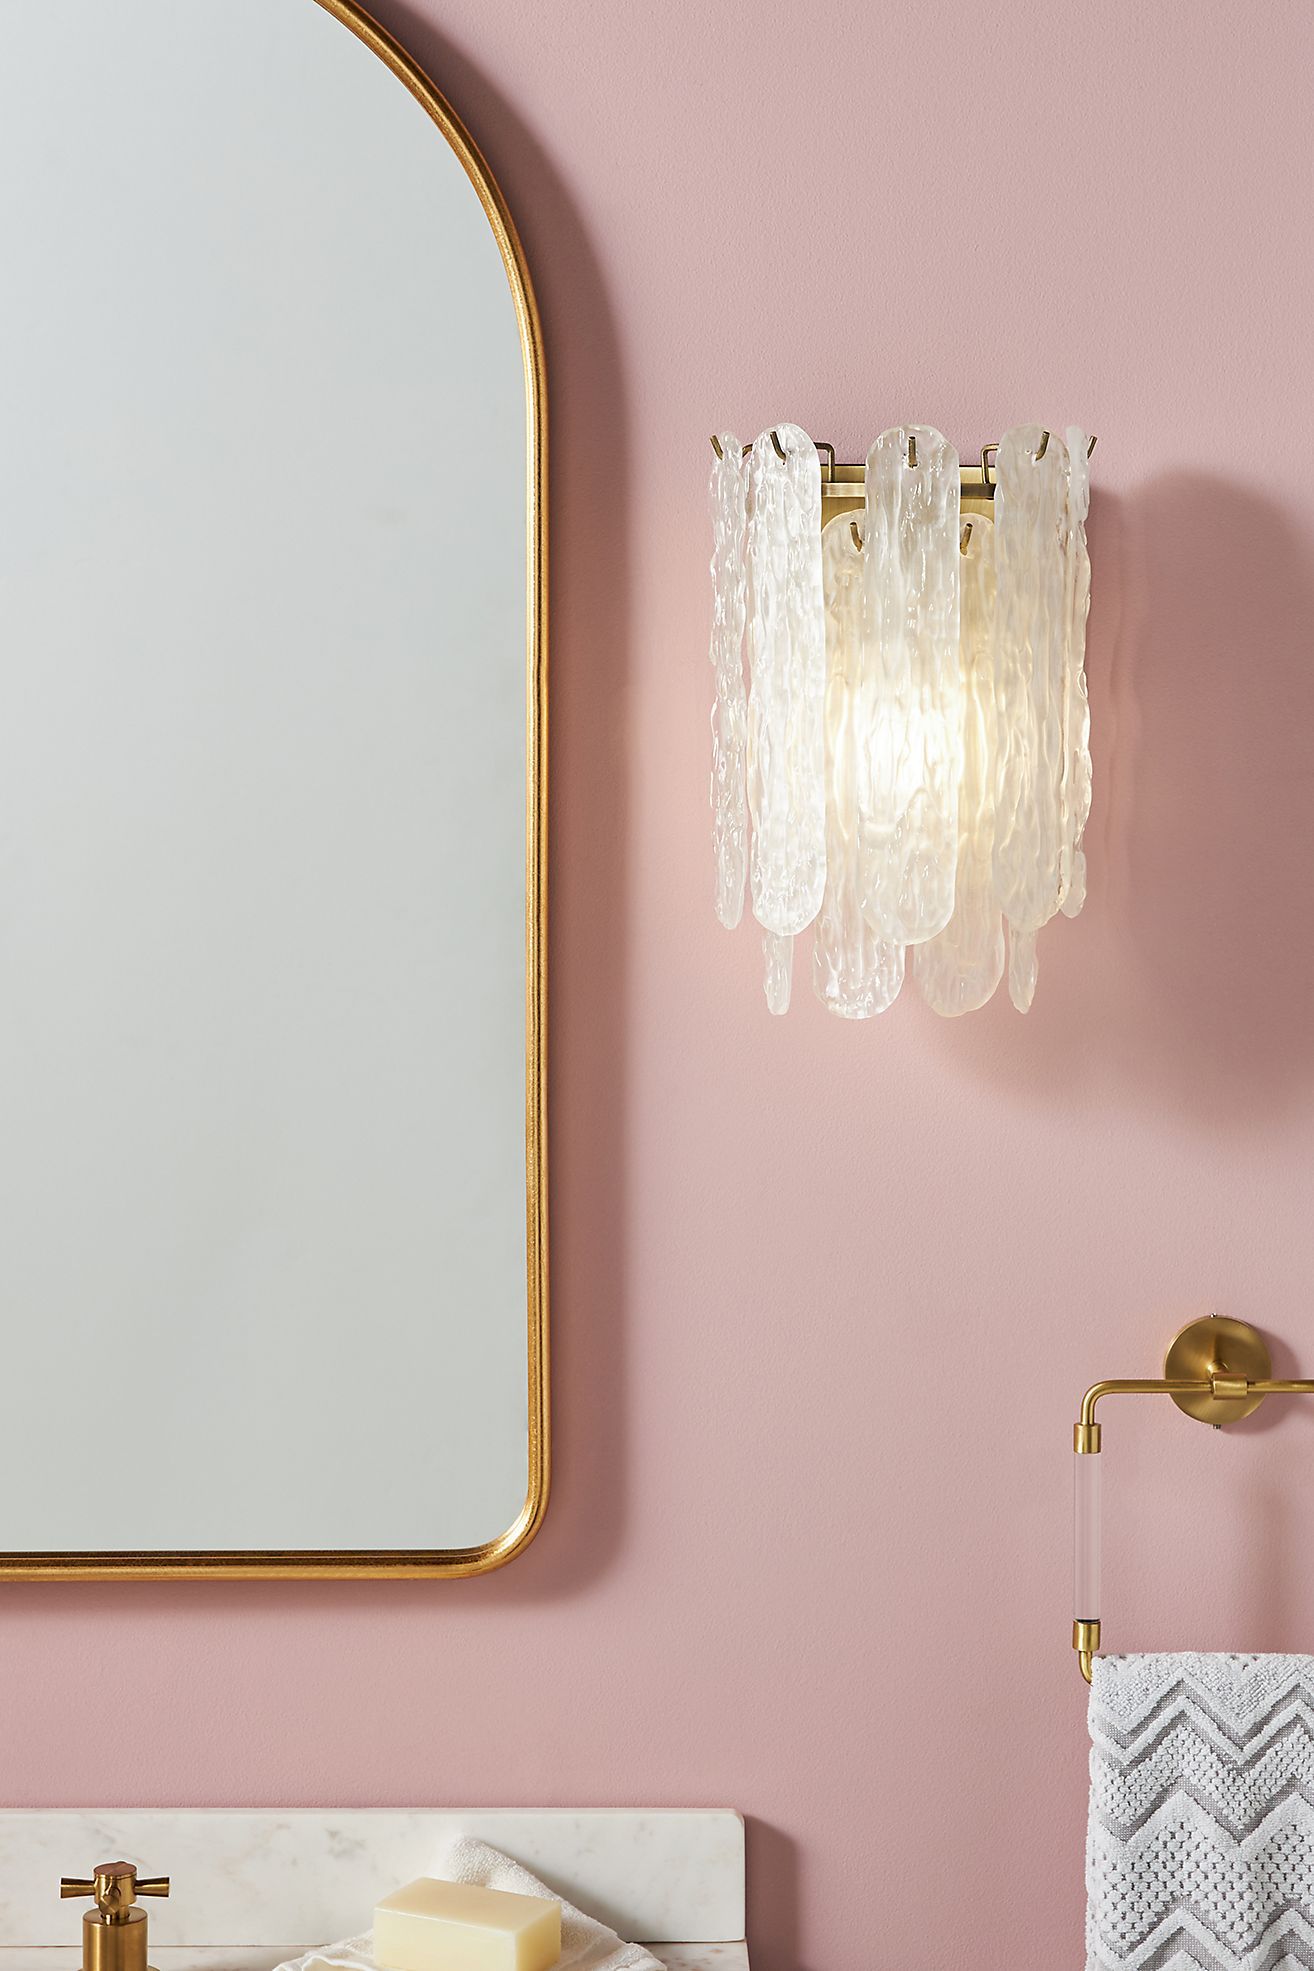 Add Some Elegance With a Textured Glass Sconce